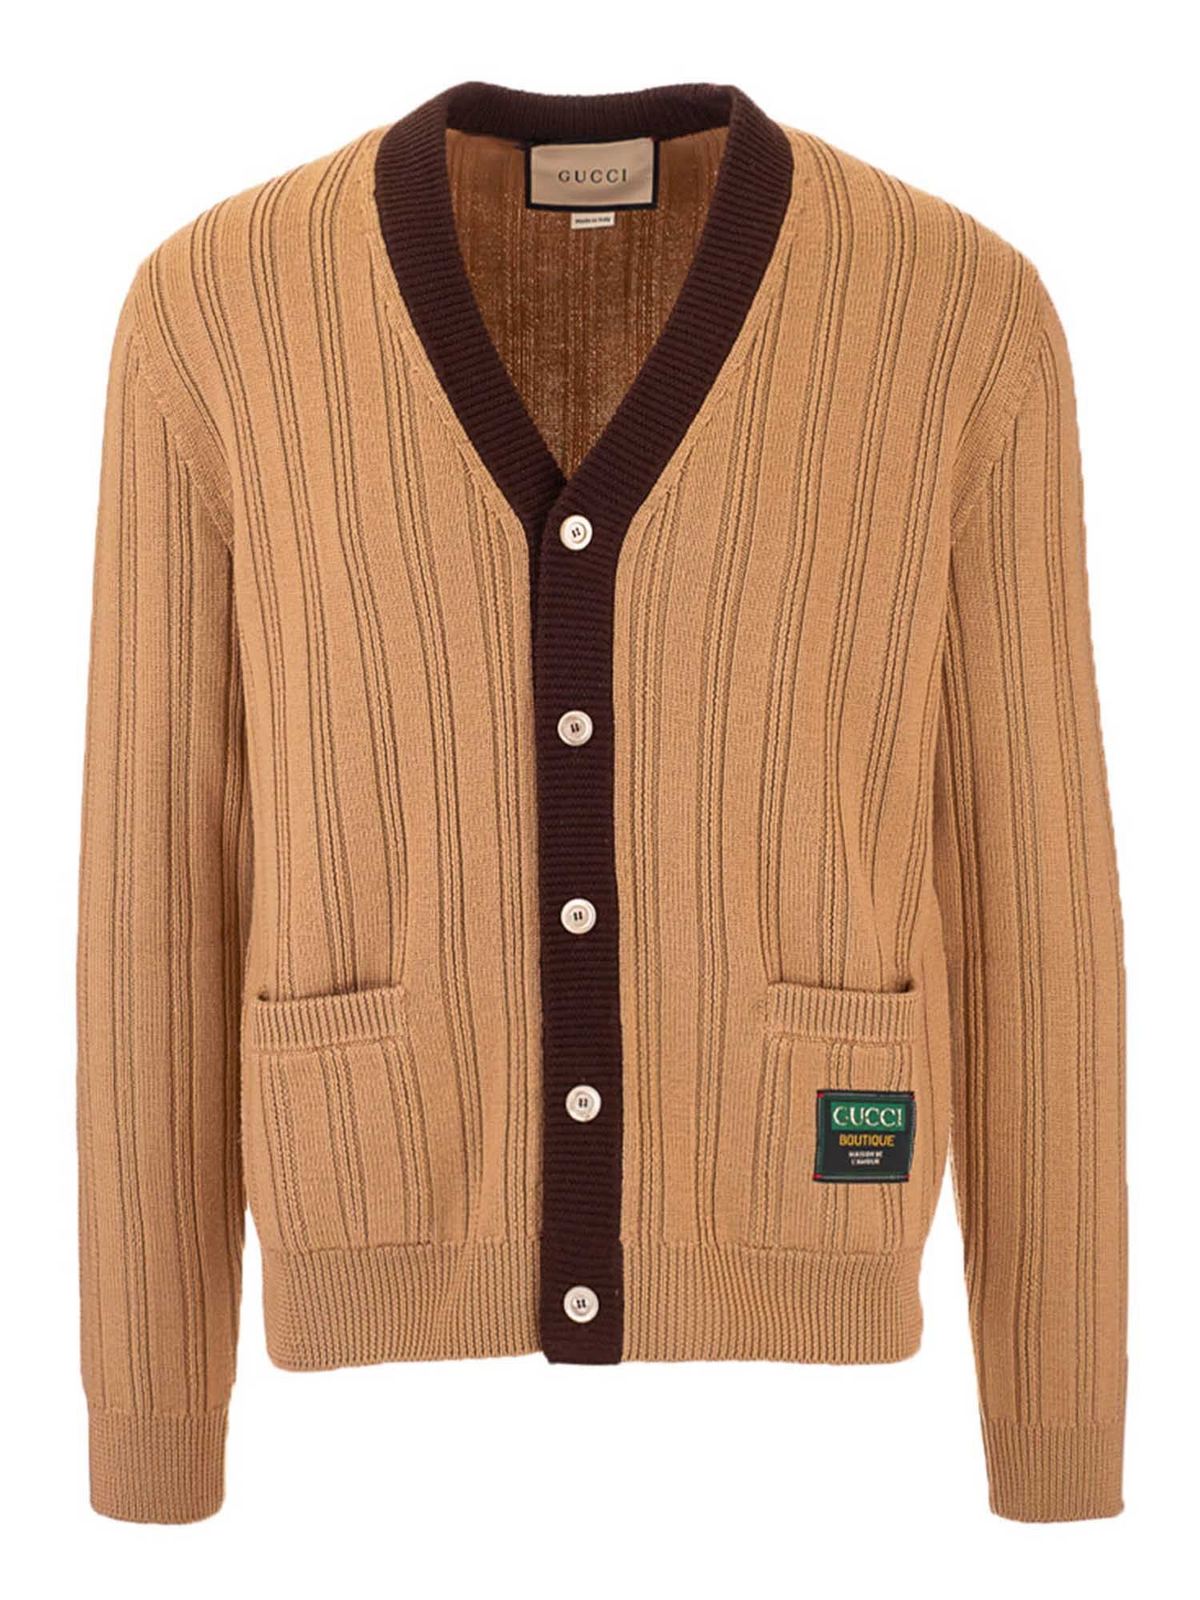 Gucci Ribbed Cardigan In Camel Color